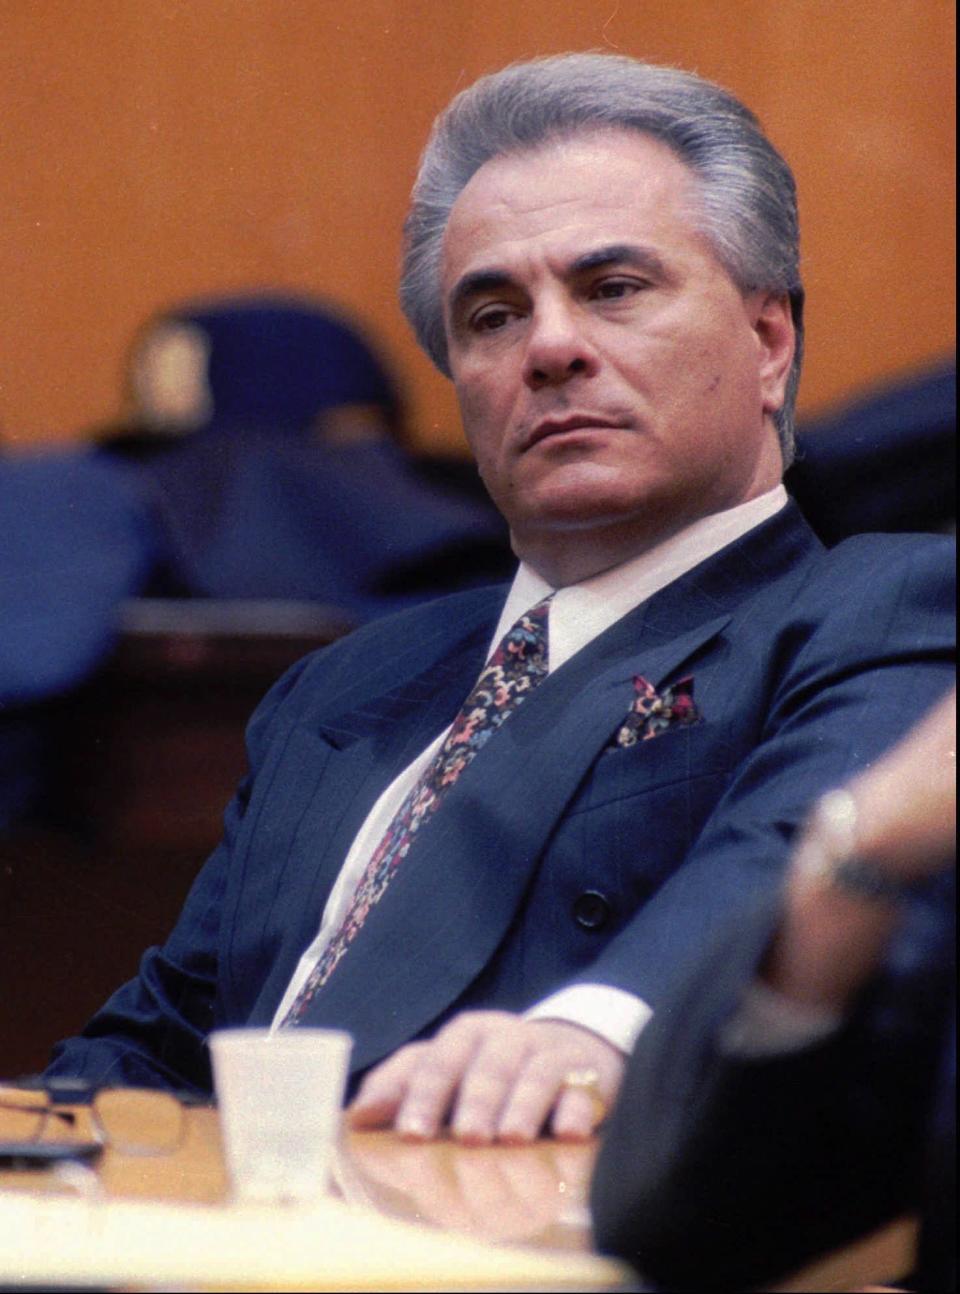 John Gotti (shown in 1990) was the boss of the Gambino crime family in New York City. Gotti ordered and helped to orchestrate the murder of Gambino boss Paul Castellano in 1985 before taking over and becoming one of the country's most powerful crime syndicates. Gotti died in prison in 2002 at the age of 61.